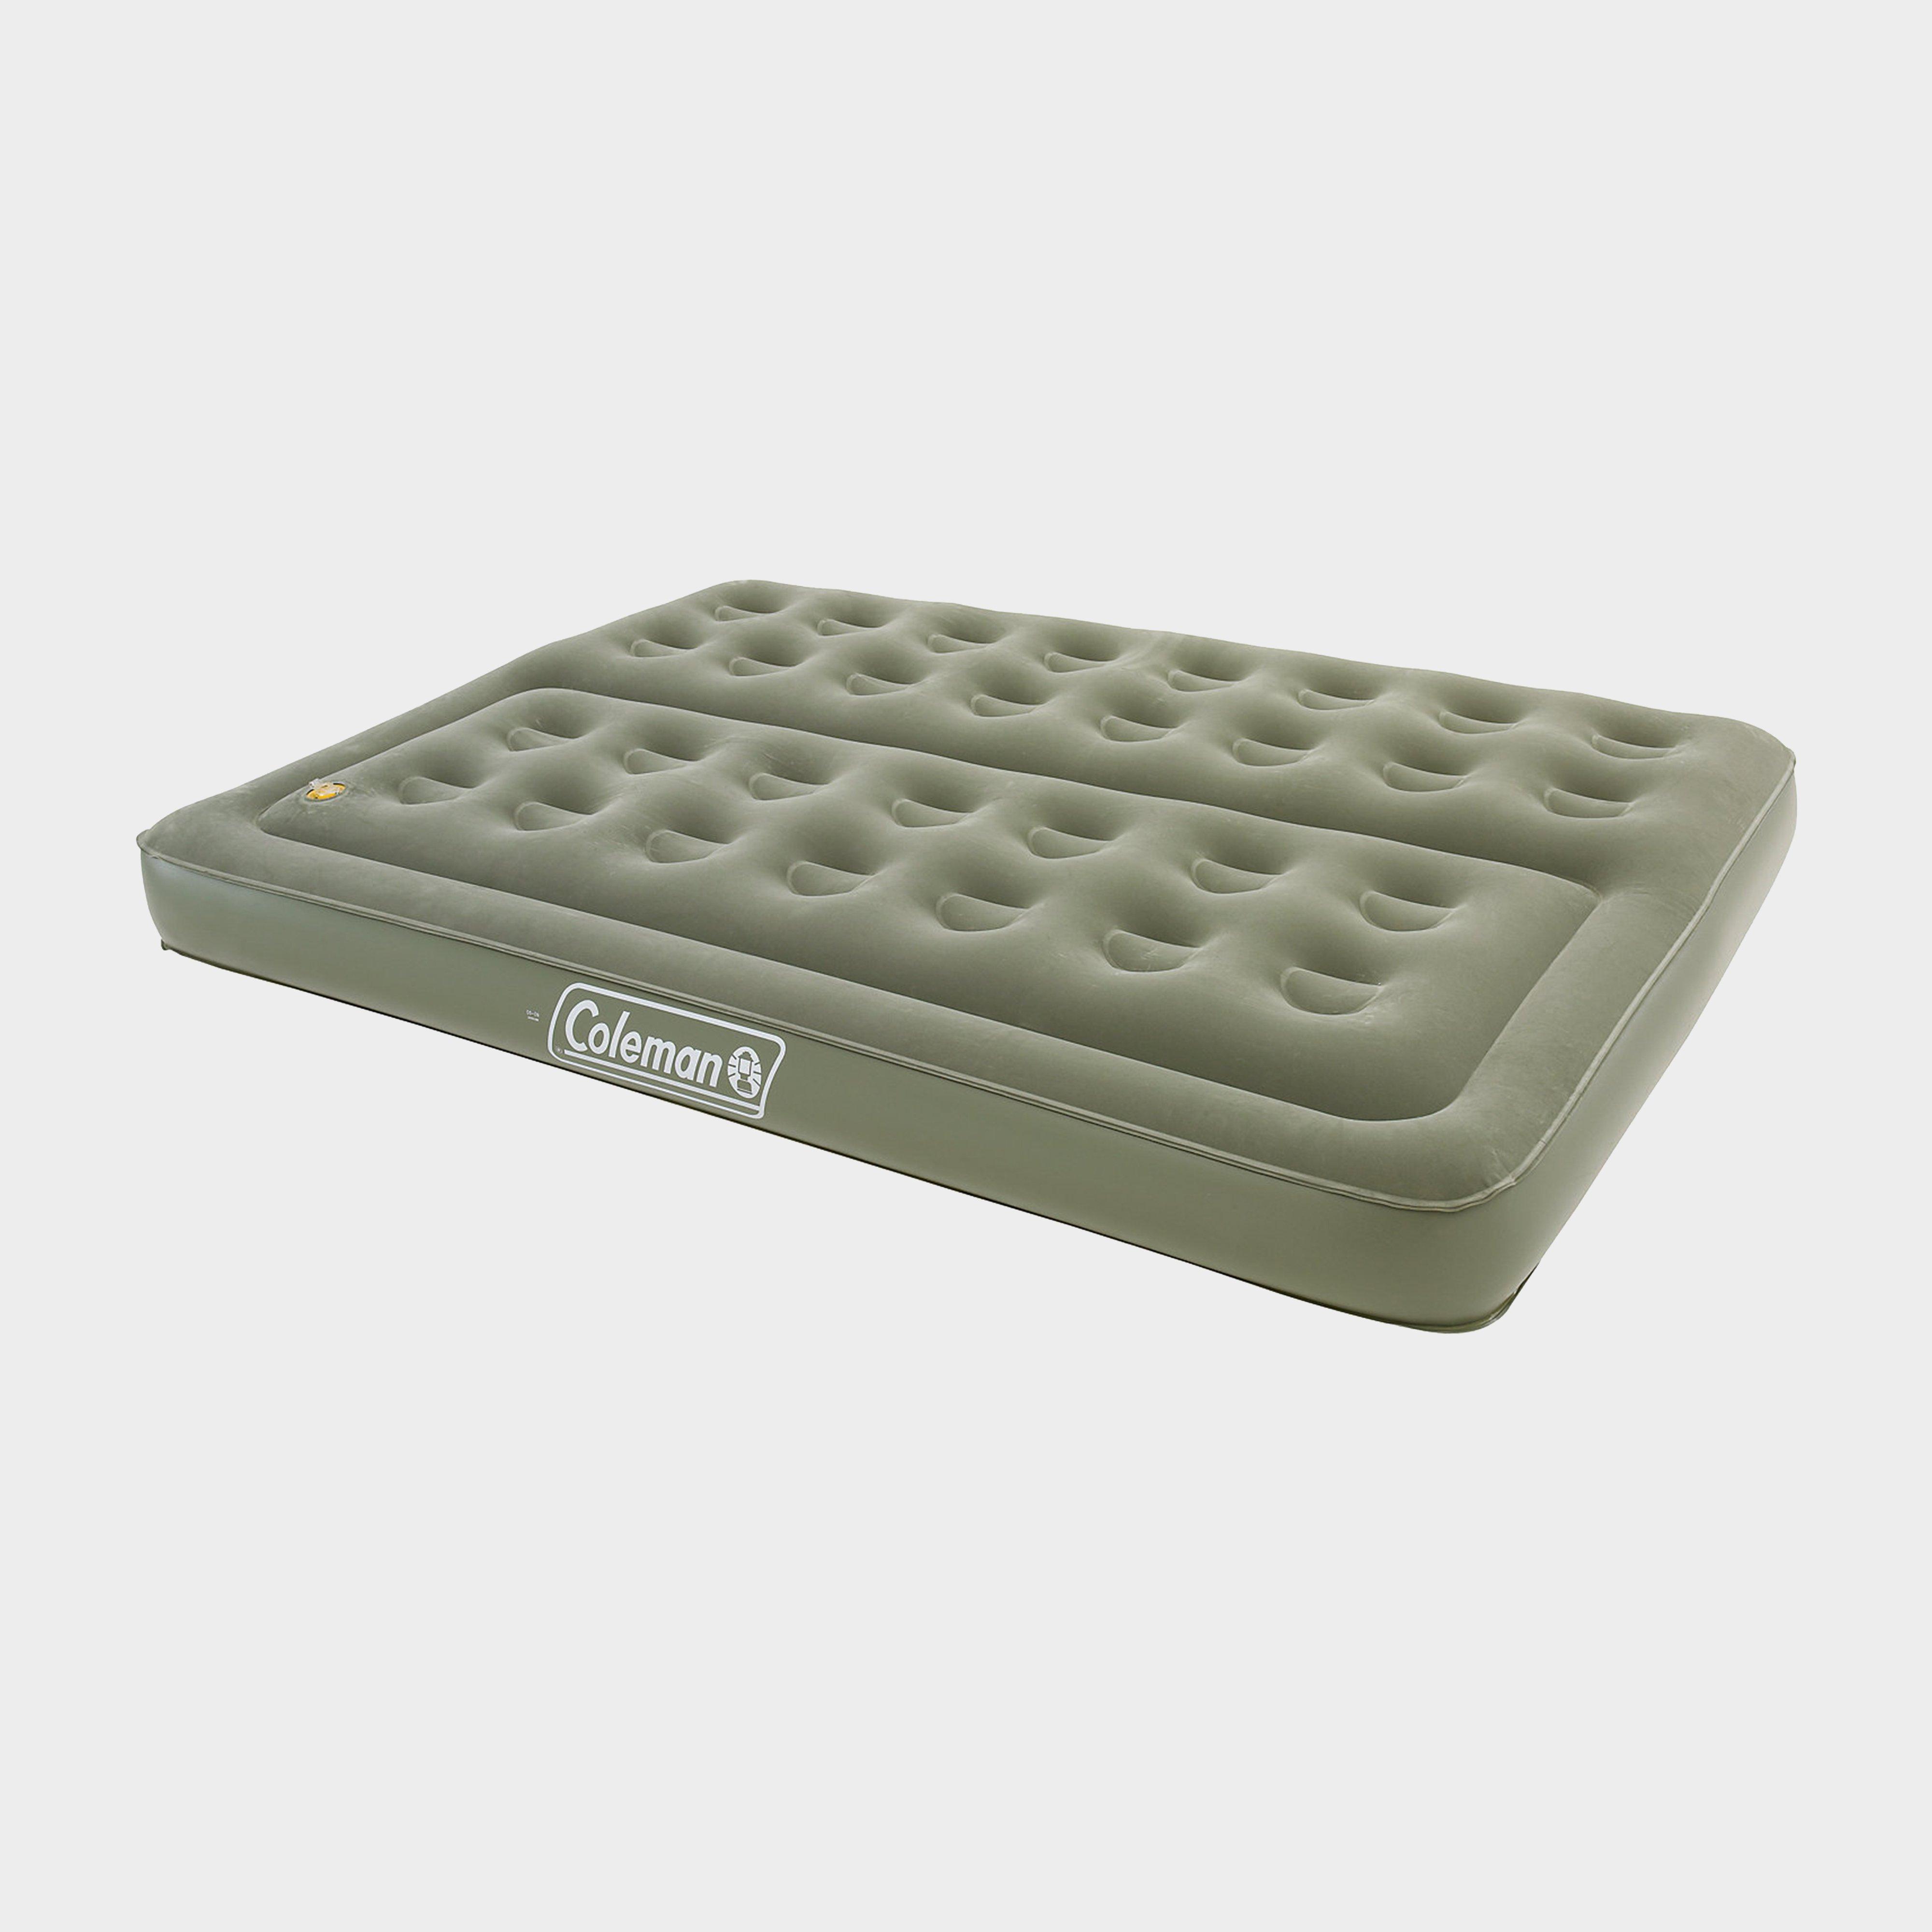  COLEMAN Maxi Comfort Double Airbed